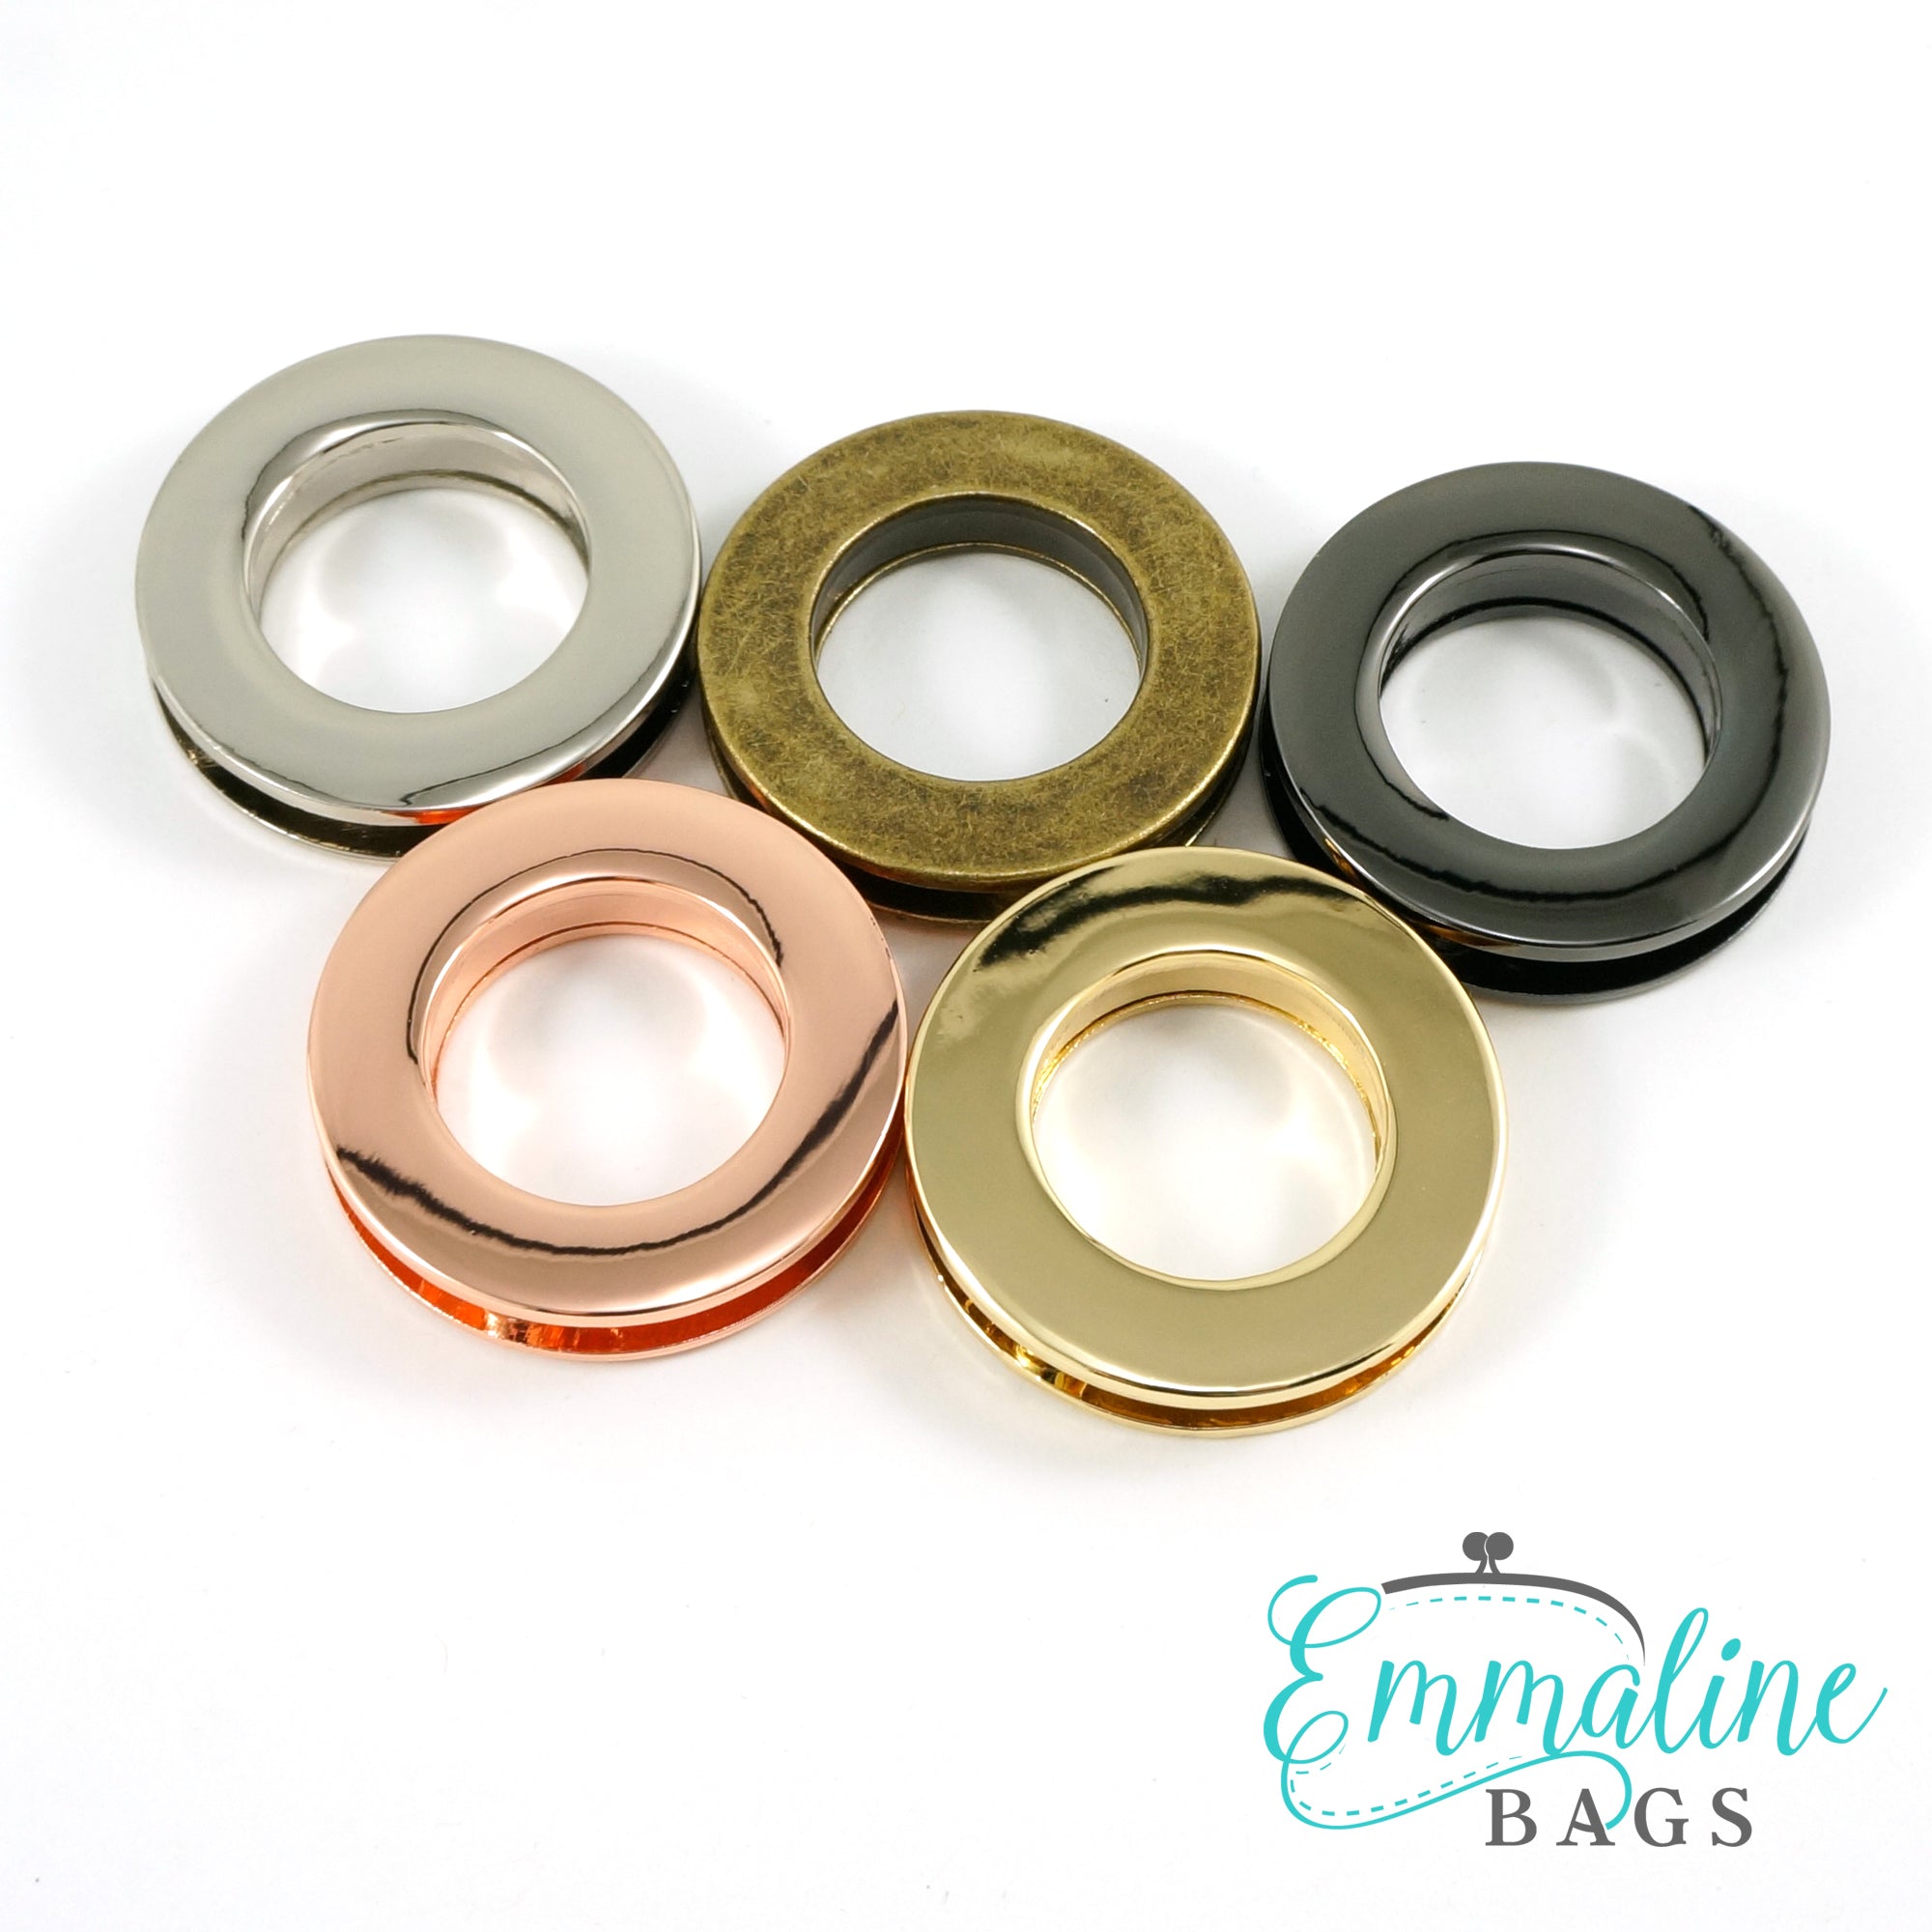 Screw Together Grommets: 3/4 Round (4 Pack) - Emmaline Bags Inc.